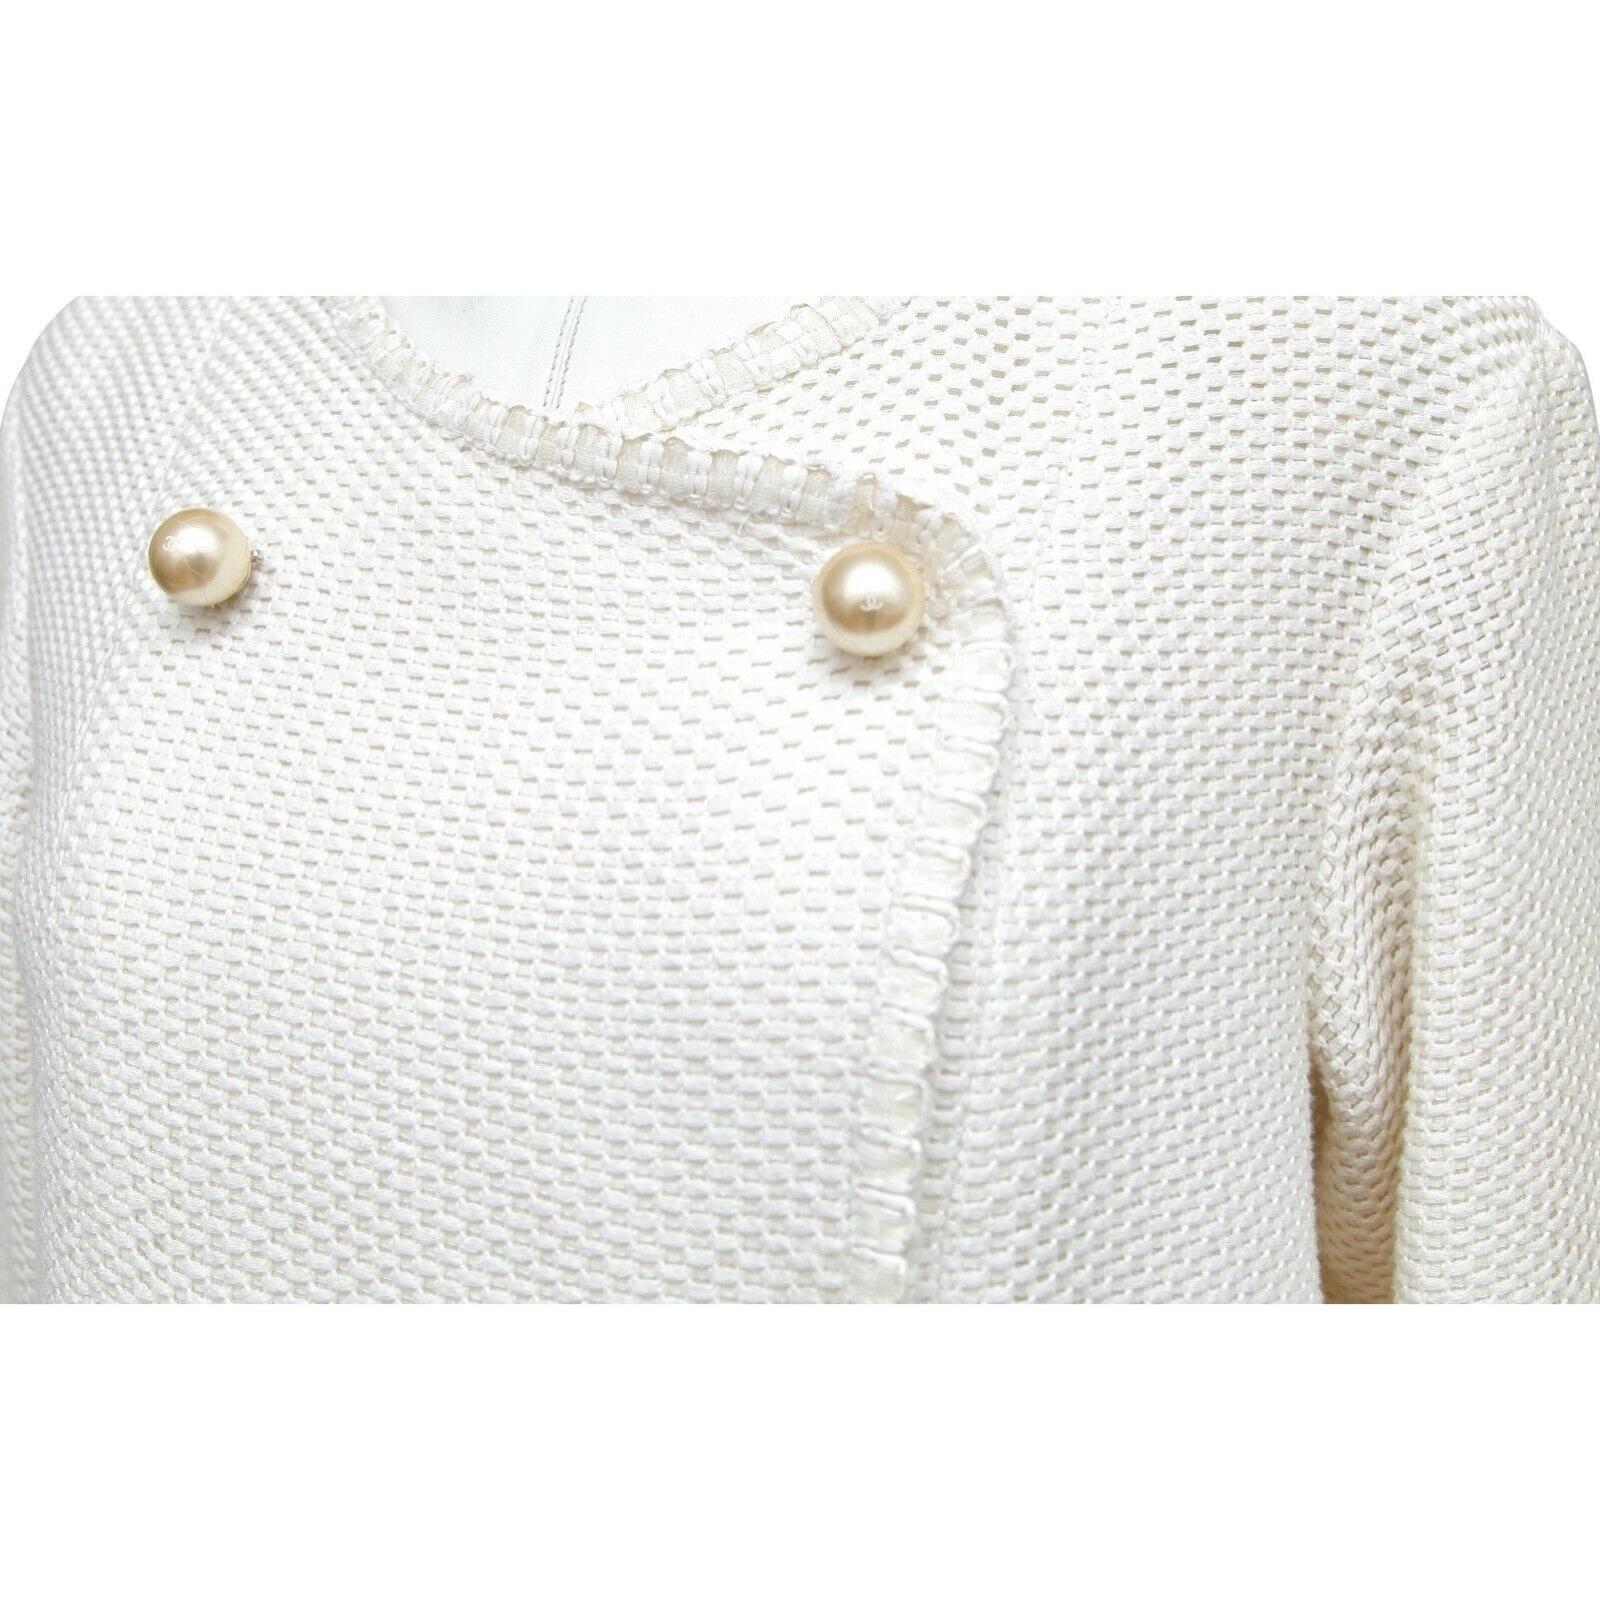 Women's CHANEL Tweed Jacket Coat White Pearl 3/4 Sleeve Double Breasted 2013 13S Sz 34 For Sale